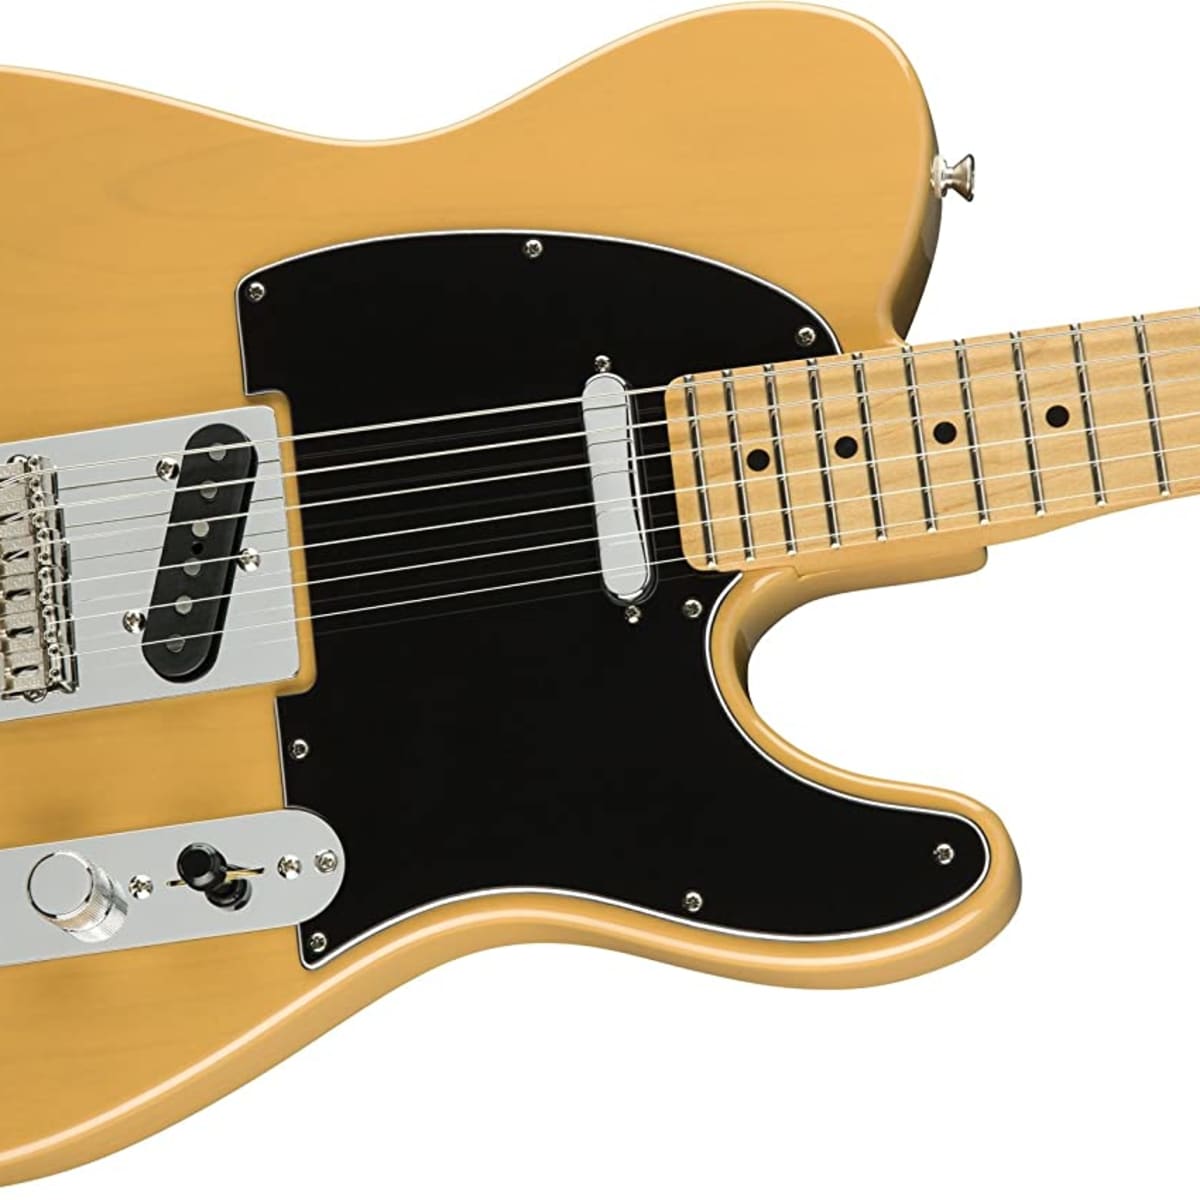 Fender Player Telecaster: Review of the MIM Tele - Spinditty